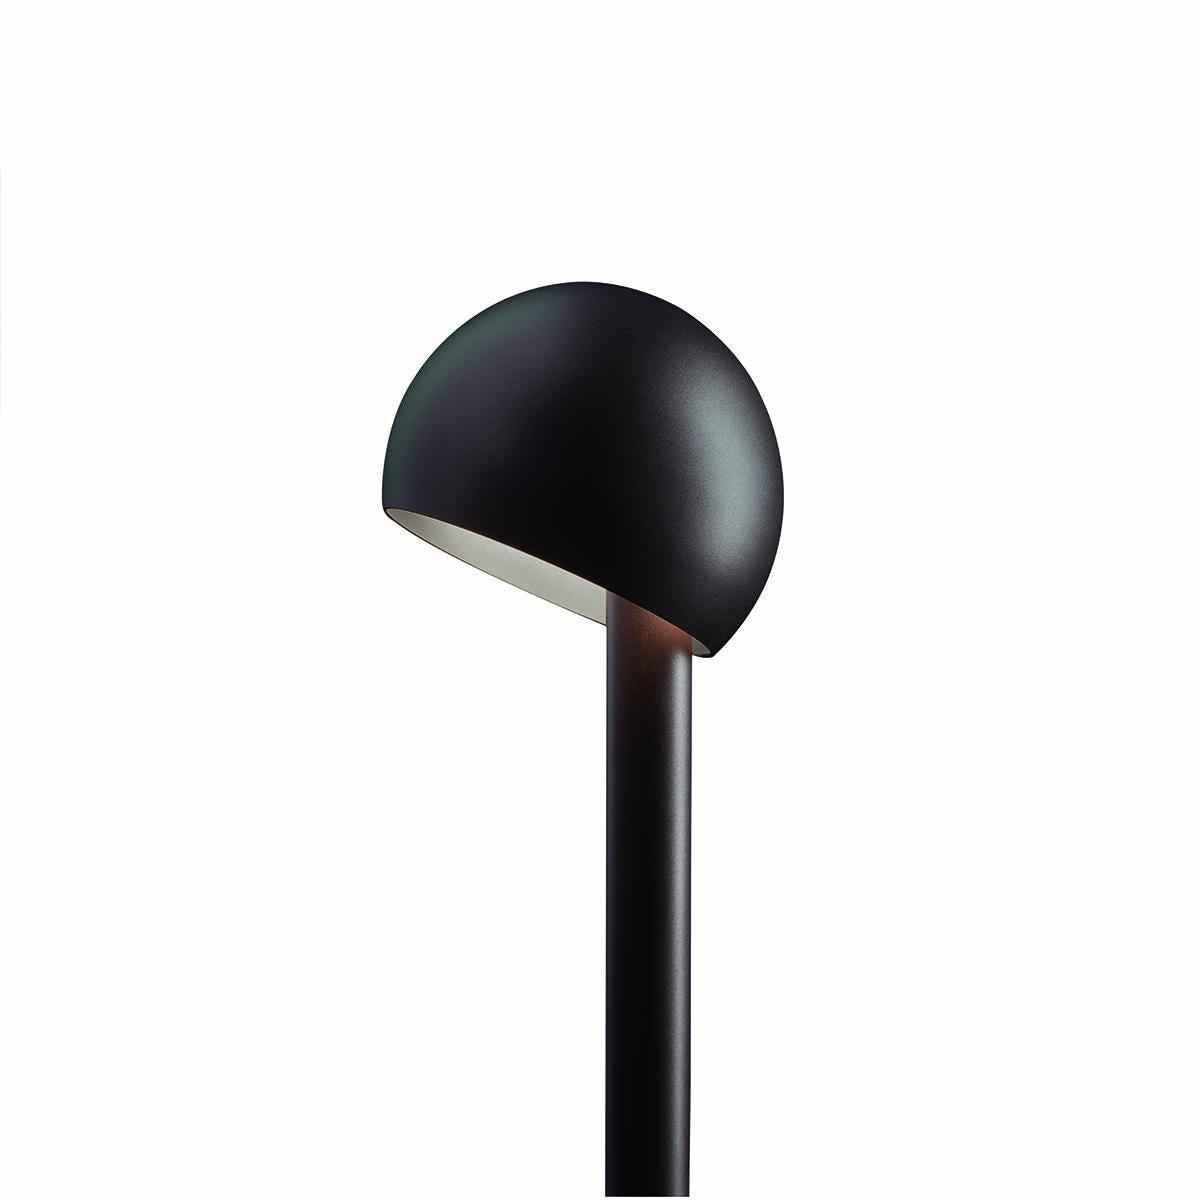 Outdoor lamp 'Otto' designed by Federica Farina in 2019. Outdoor lamp giving indirect led light with adjustable reflector and stem in painted Indian brown metal. Manufactured by Oluce, Italy.

Otto by Federica Farina, is a path-light with a soft,